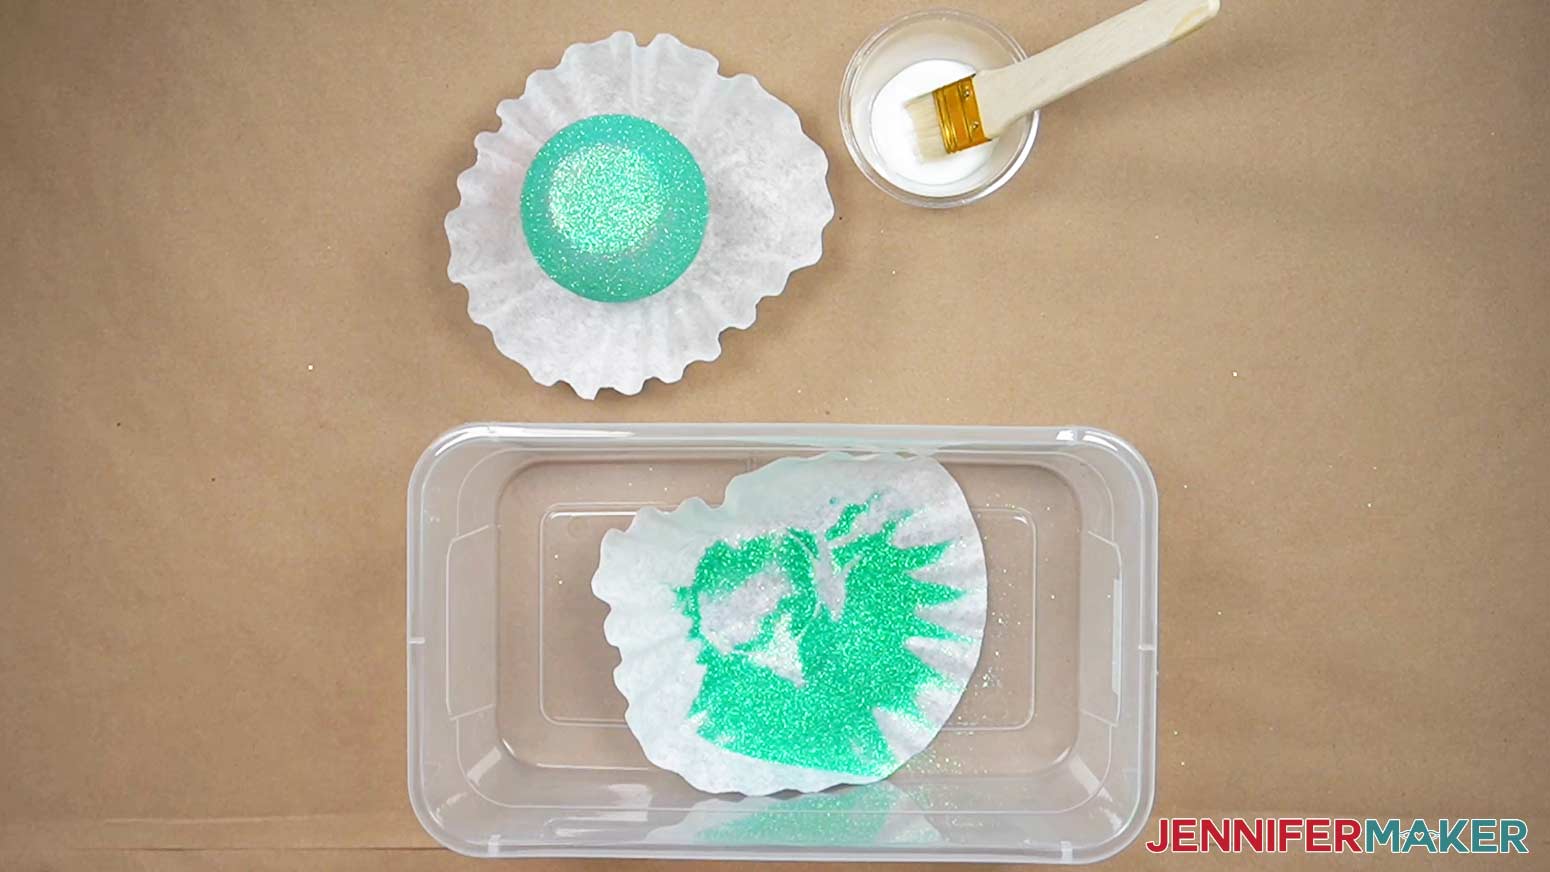 Turn the glass upside down on a coffee filter to dry after adding the glitter.